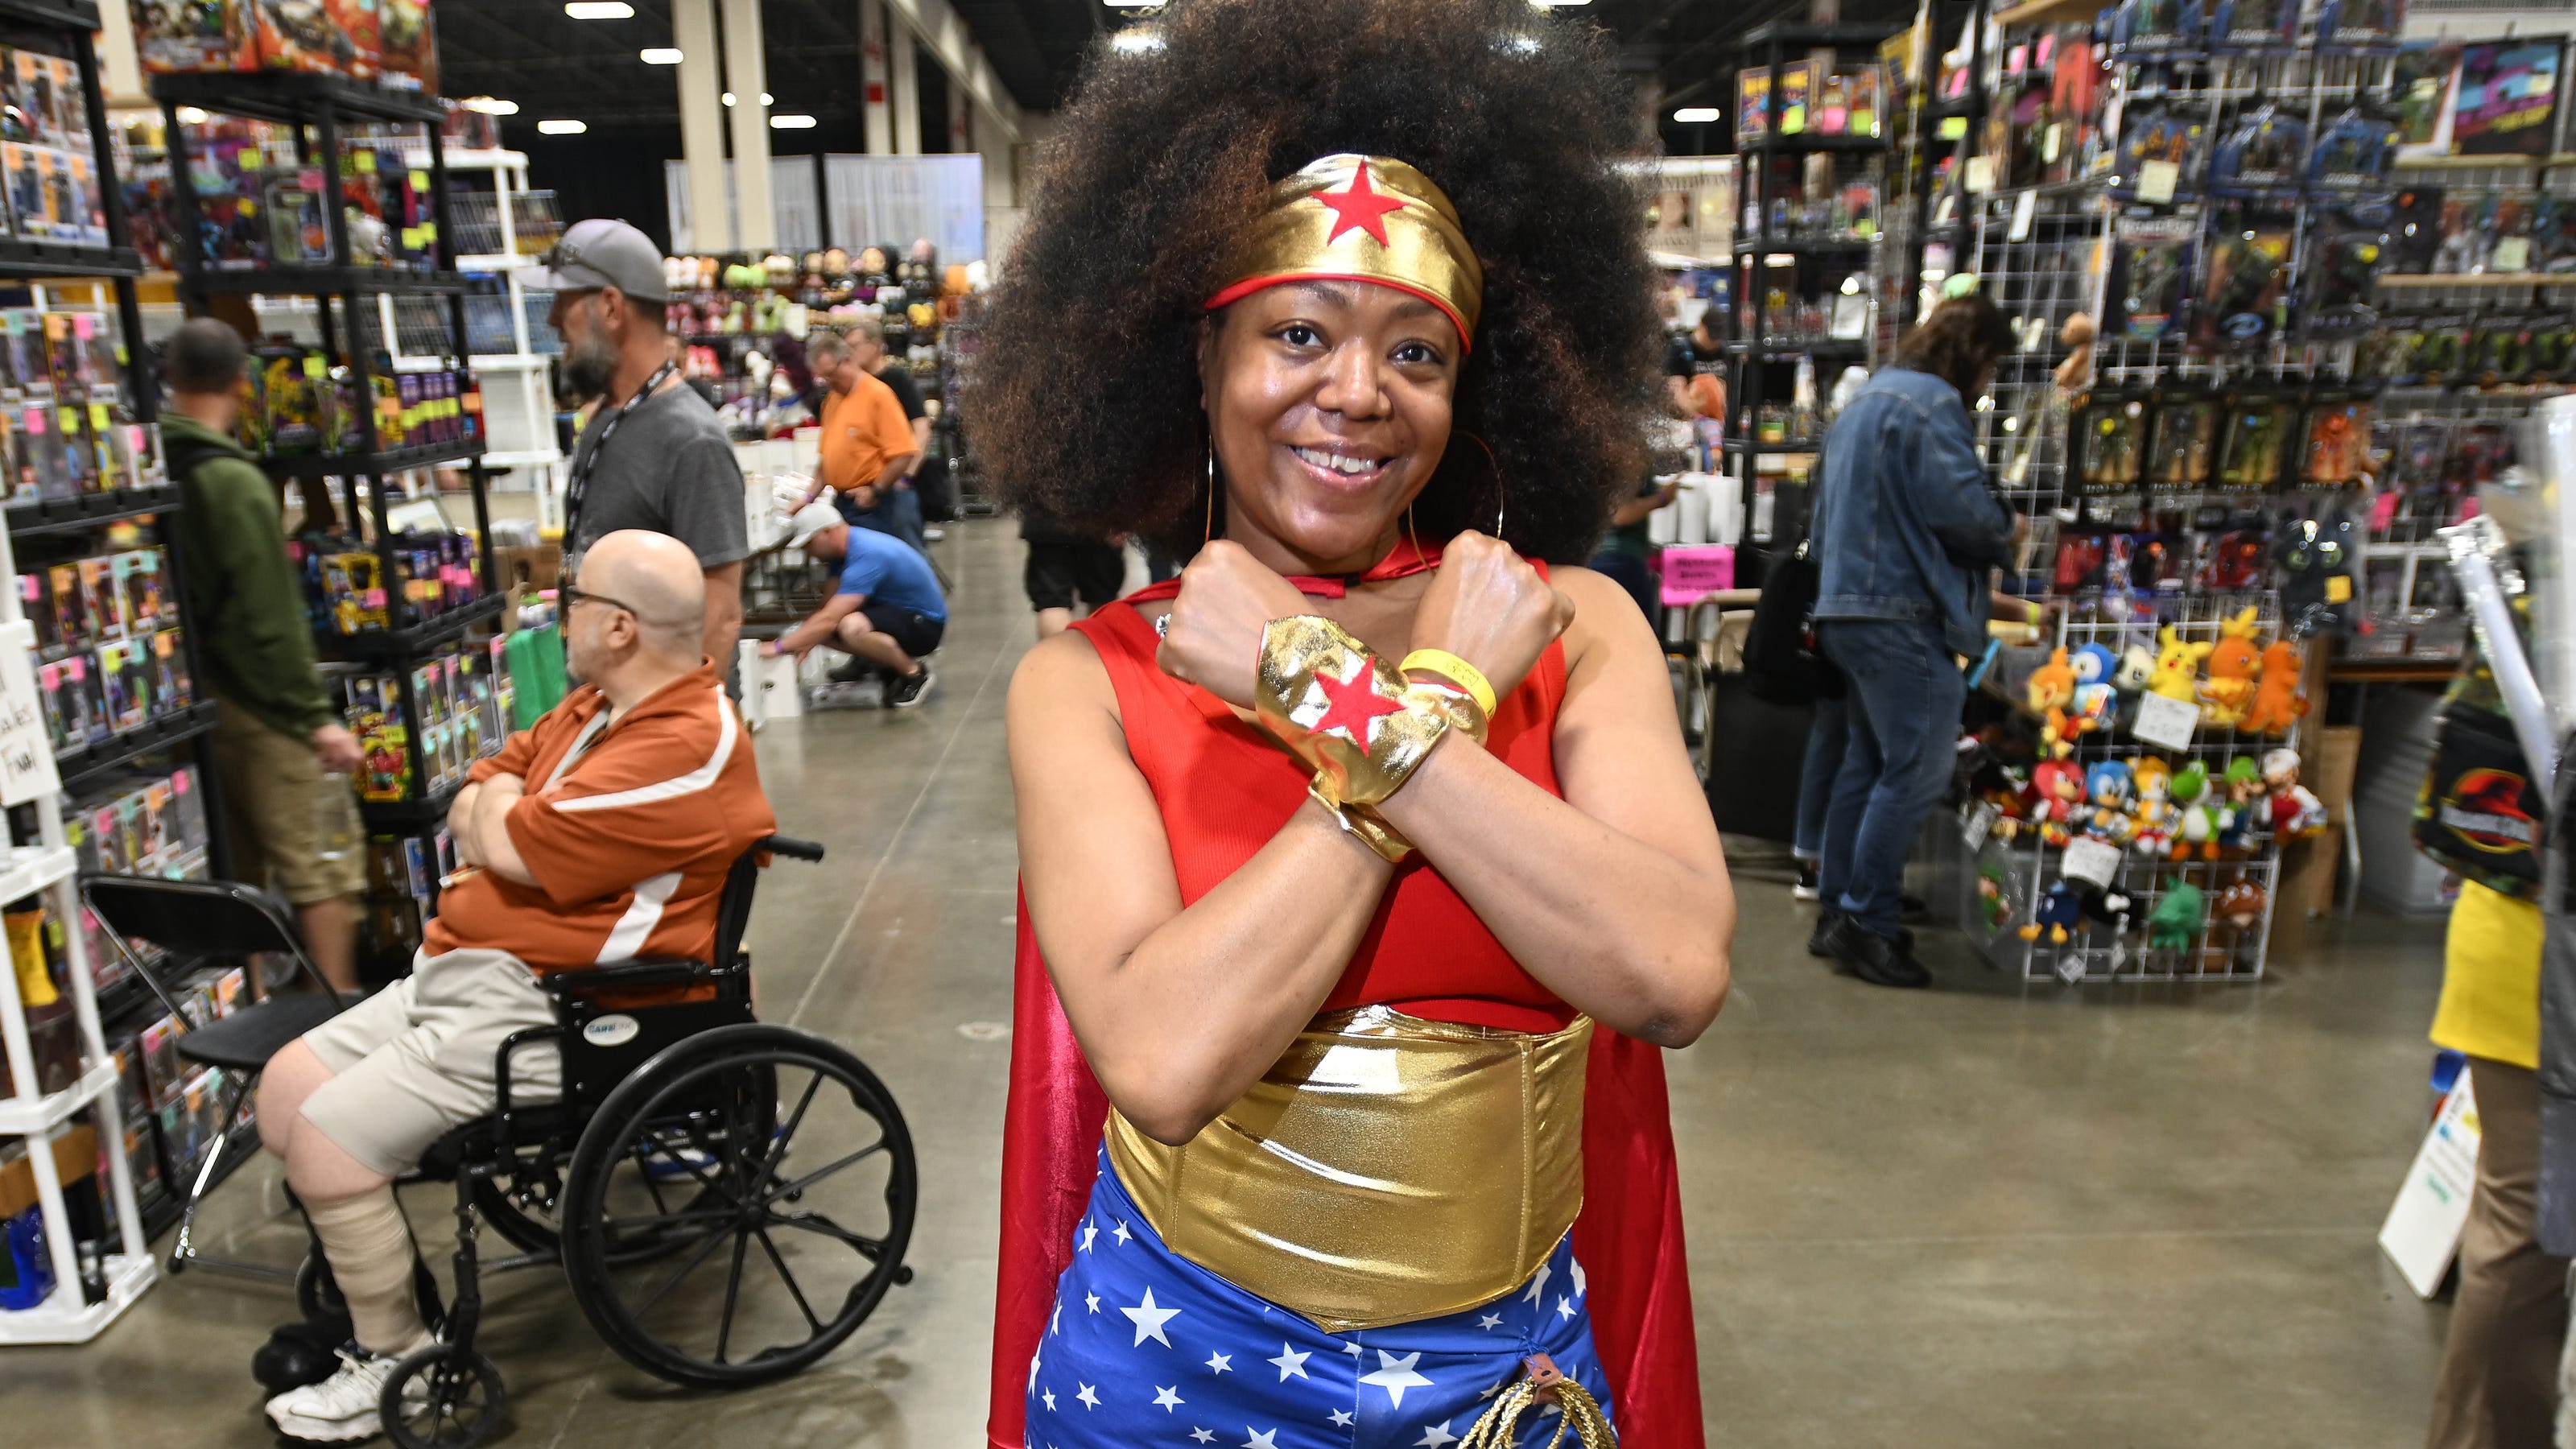 Motor City Comic Con returns to Novi with a cast of characters